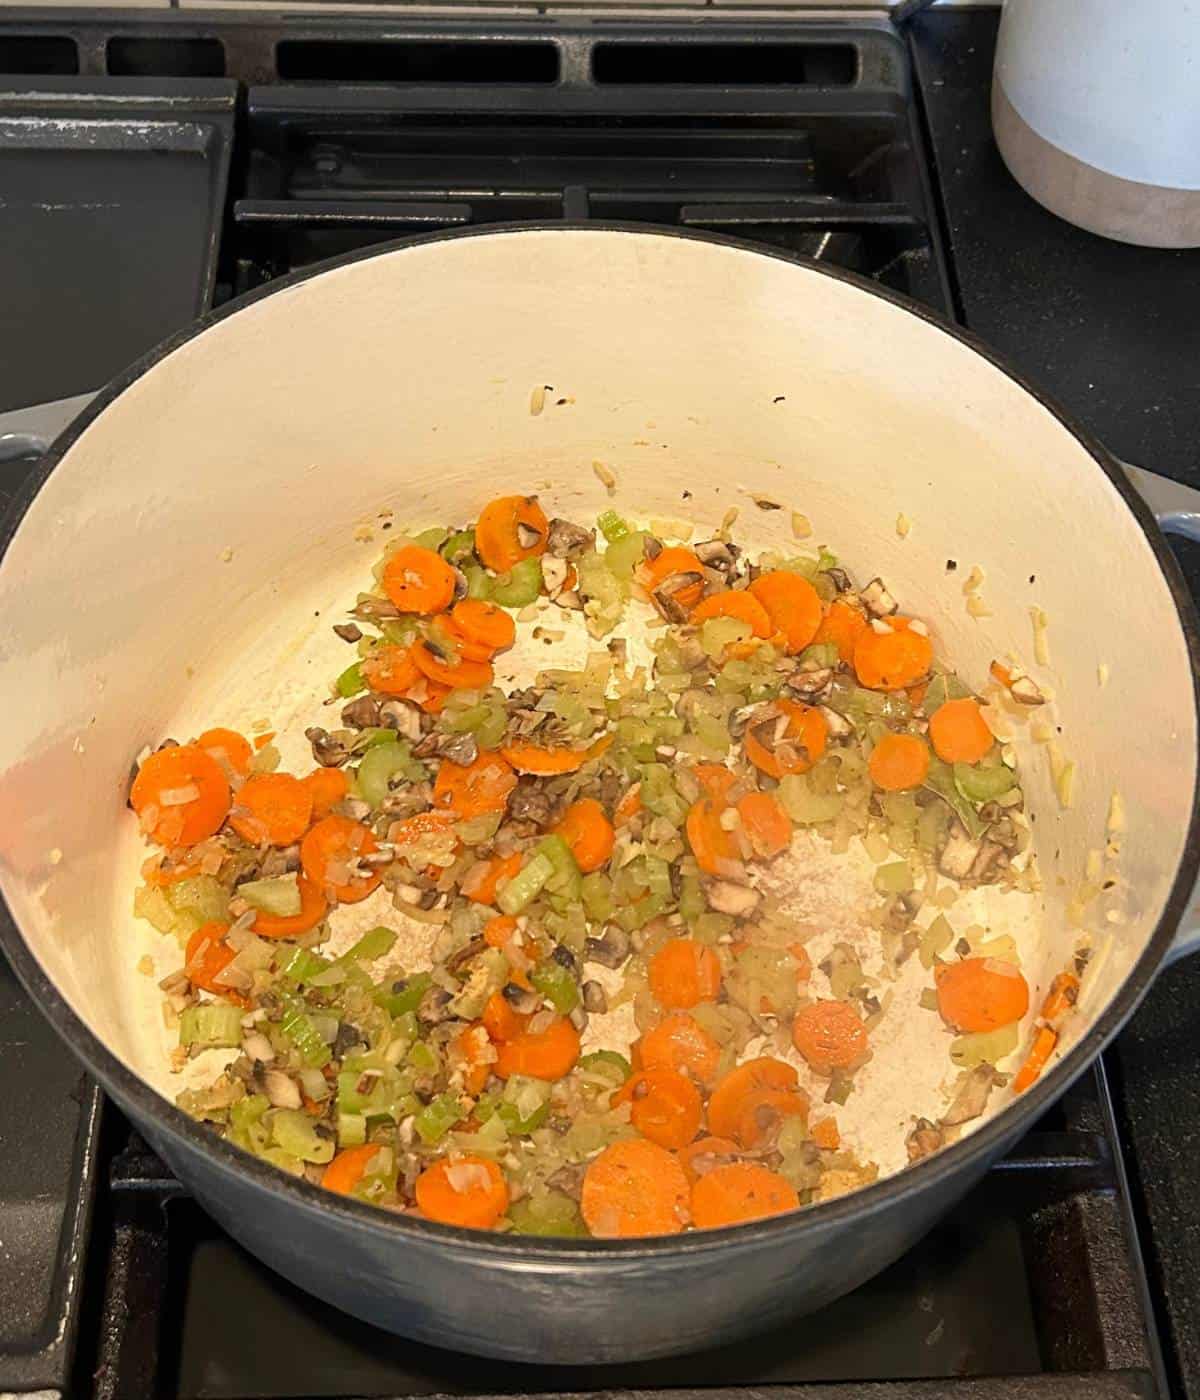 Mirepoix with mushrooms in pot.